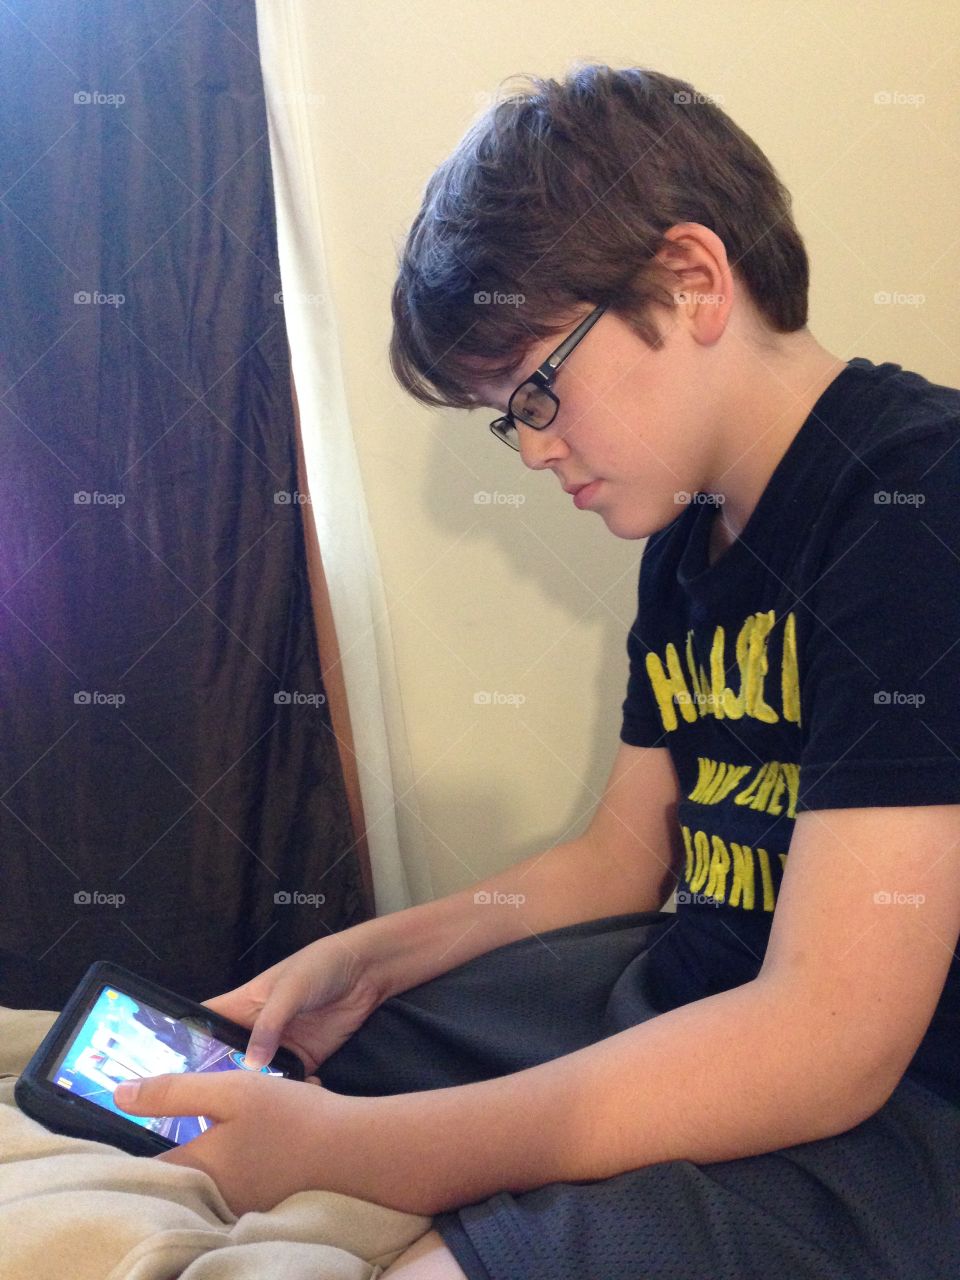 Boy holding iPad and playing a game